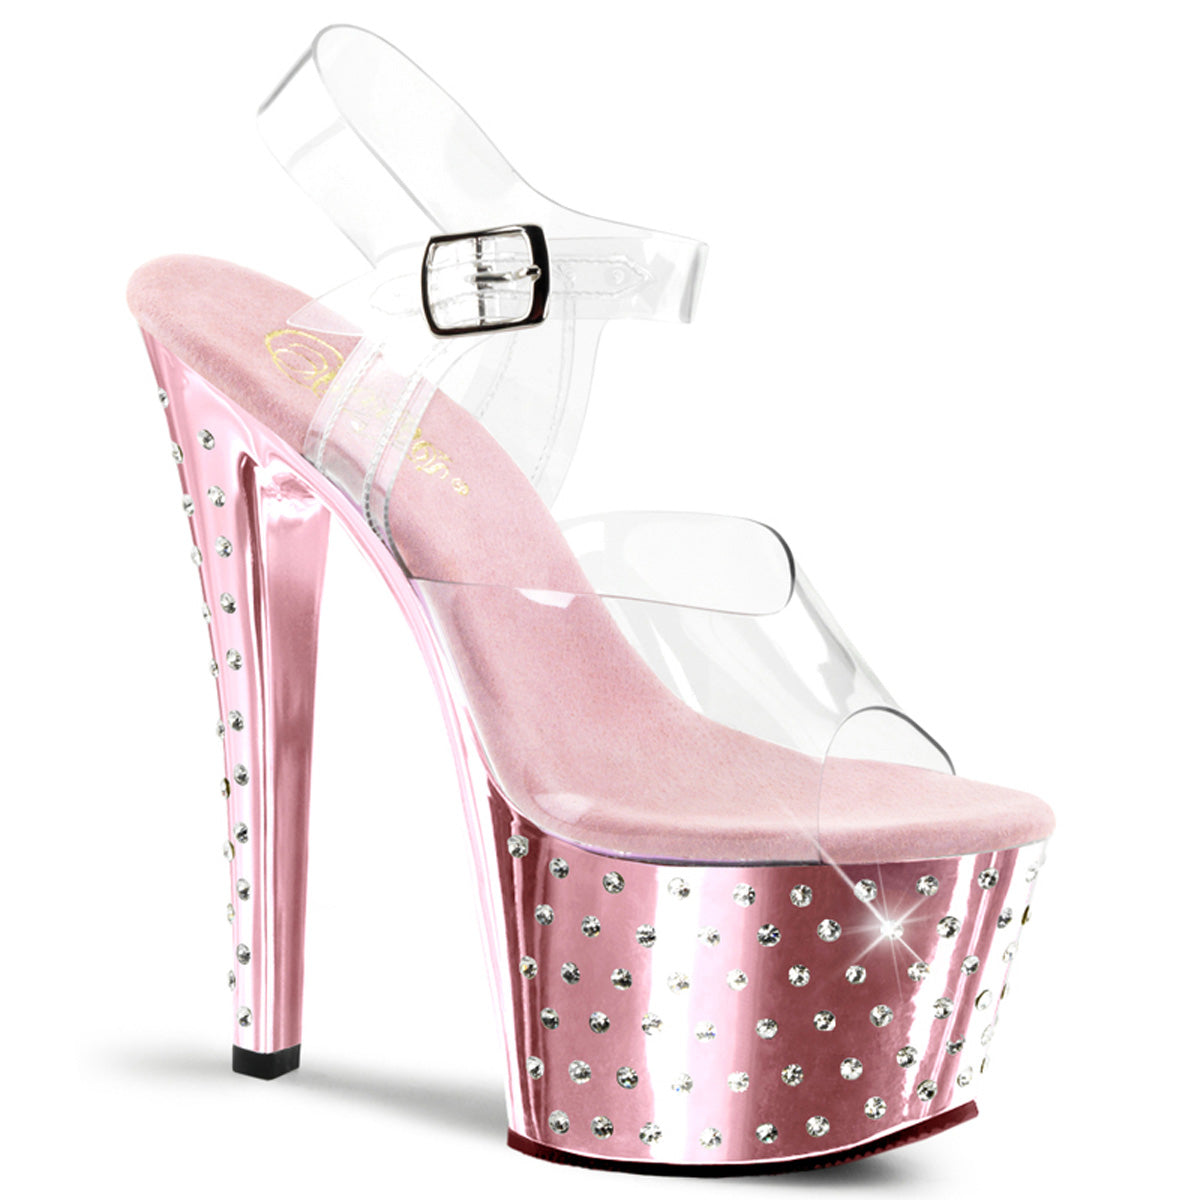 STARDUST-708 Pleaser 7" Heel Clear Baby Pink Strippers Shoes-Pleaser- Sexy Shoes